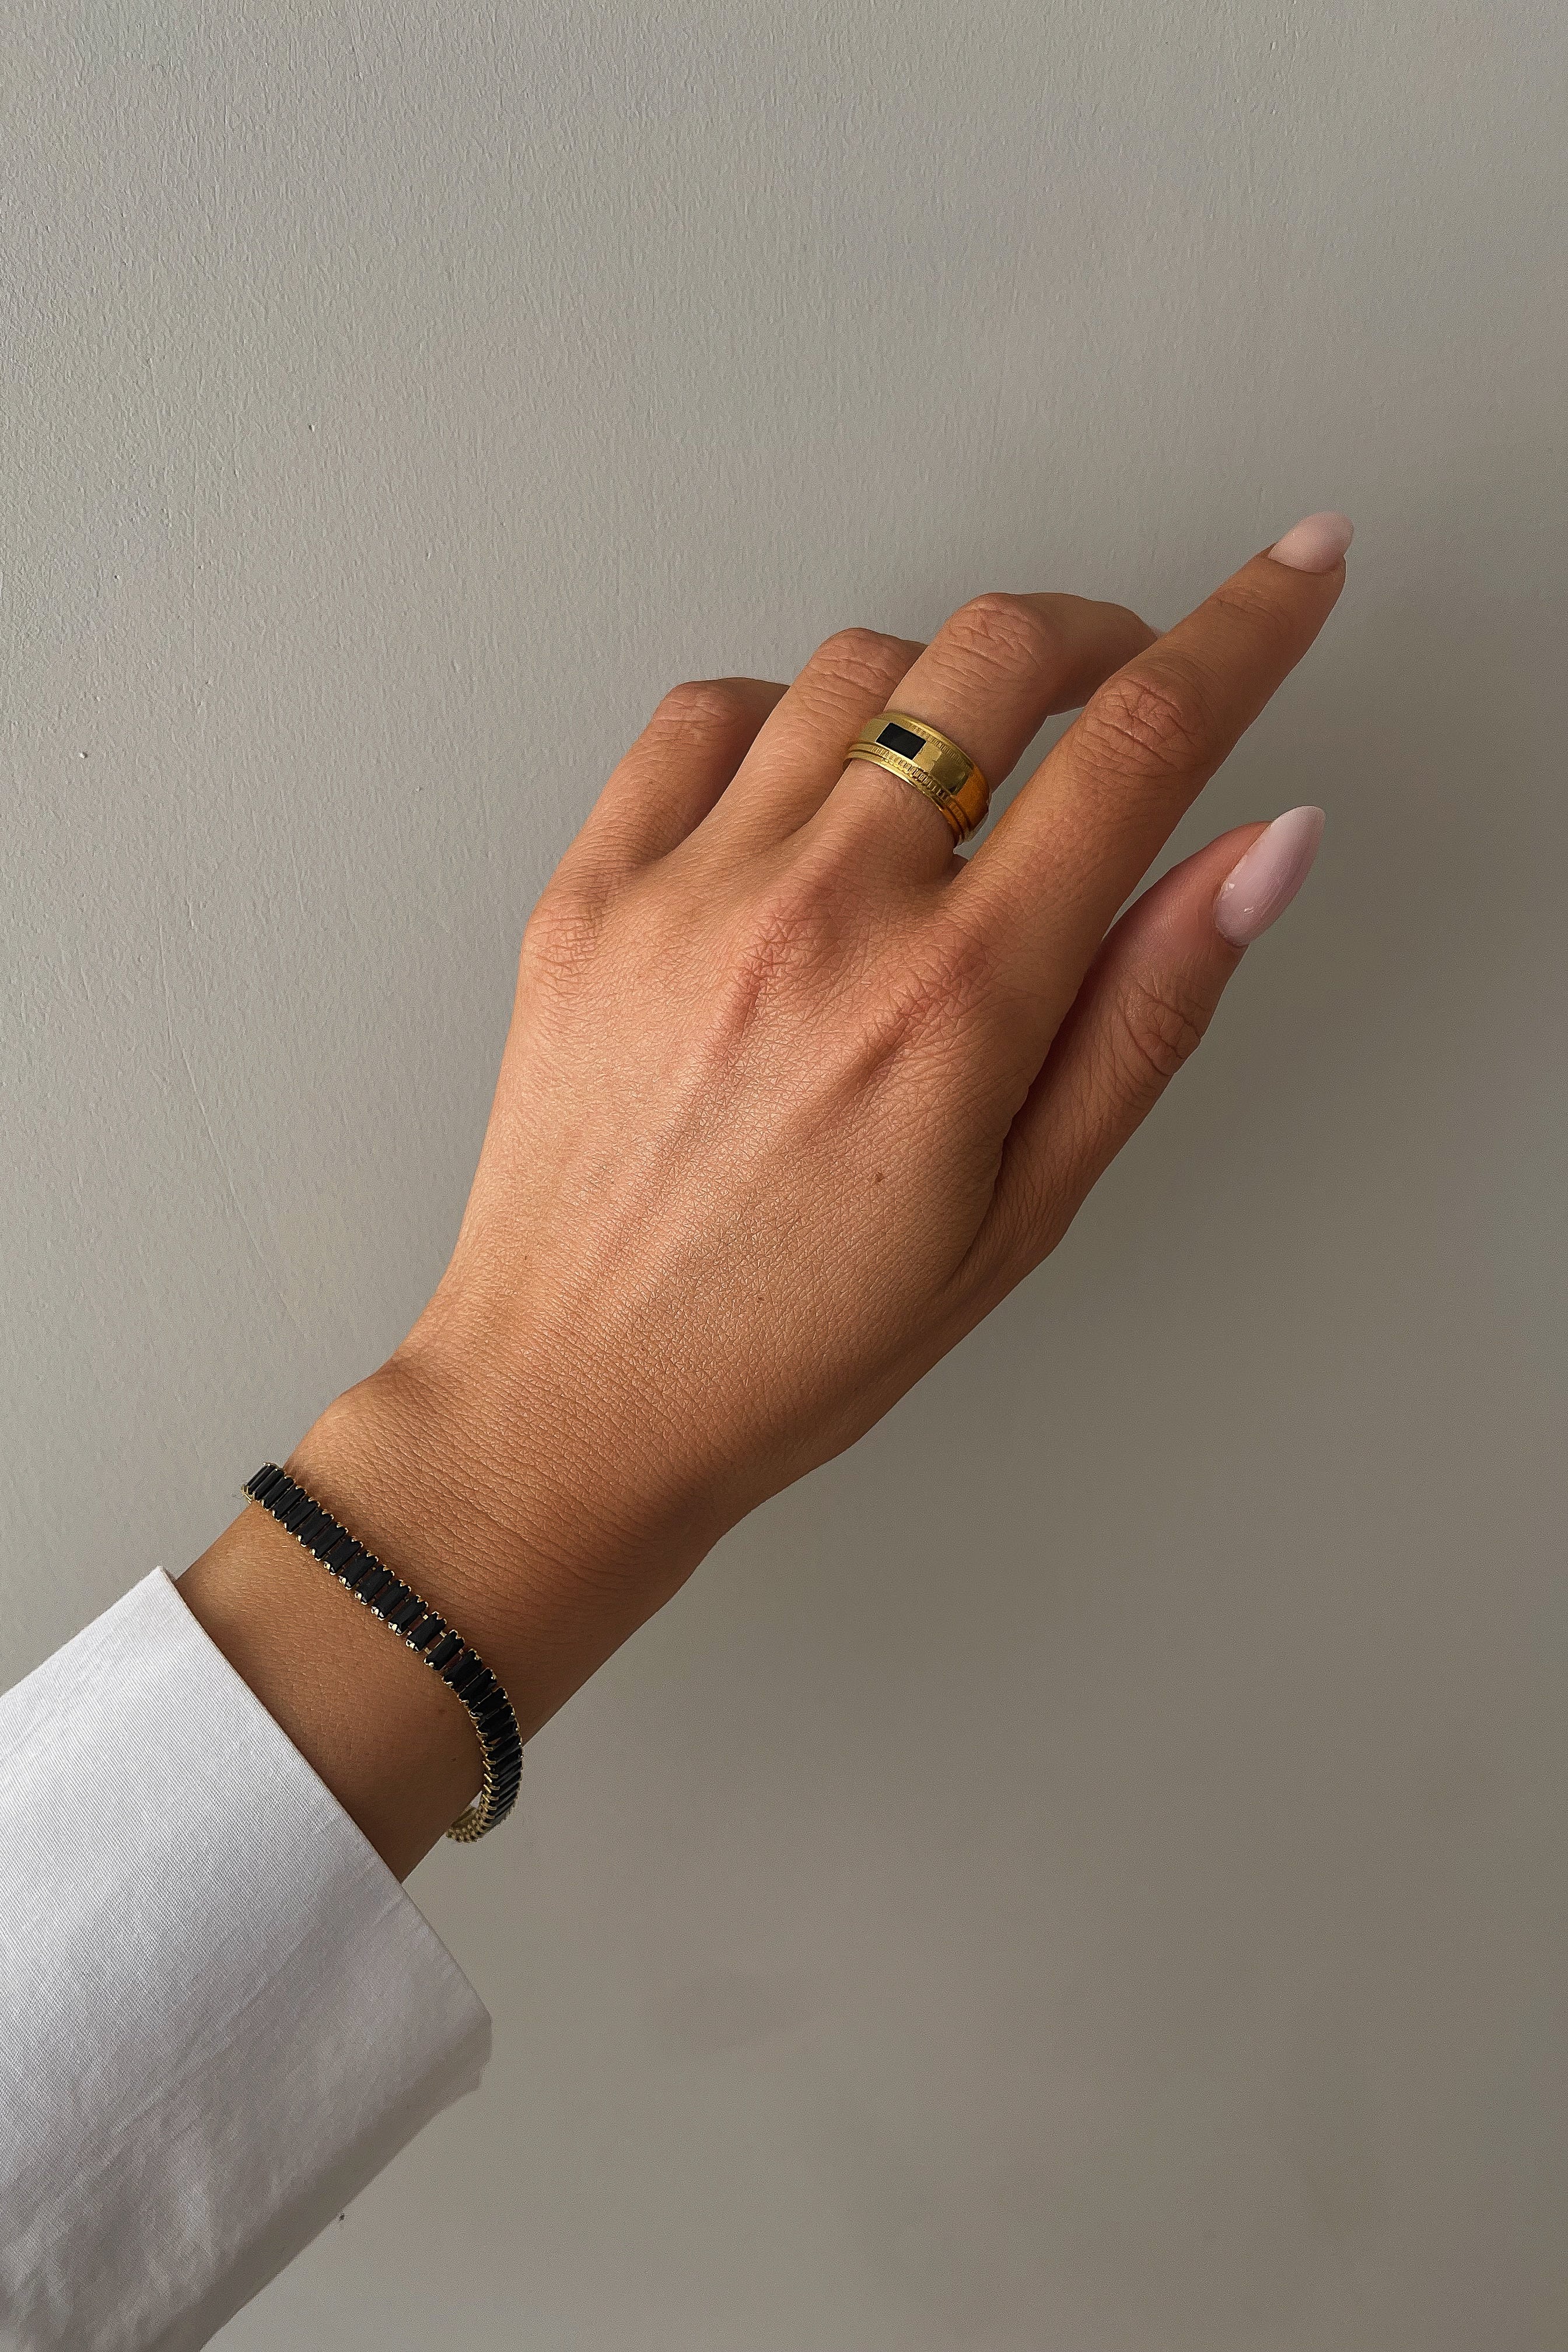 Olympia Ring - Boutique Minimaliste has waterproof, durable, elegant and vintage inspired jewelry